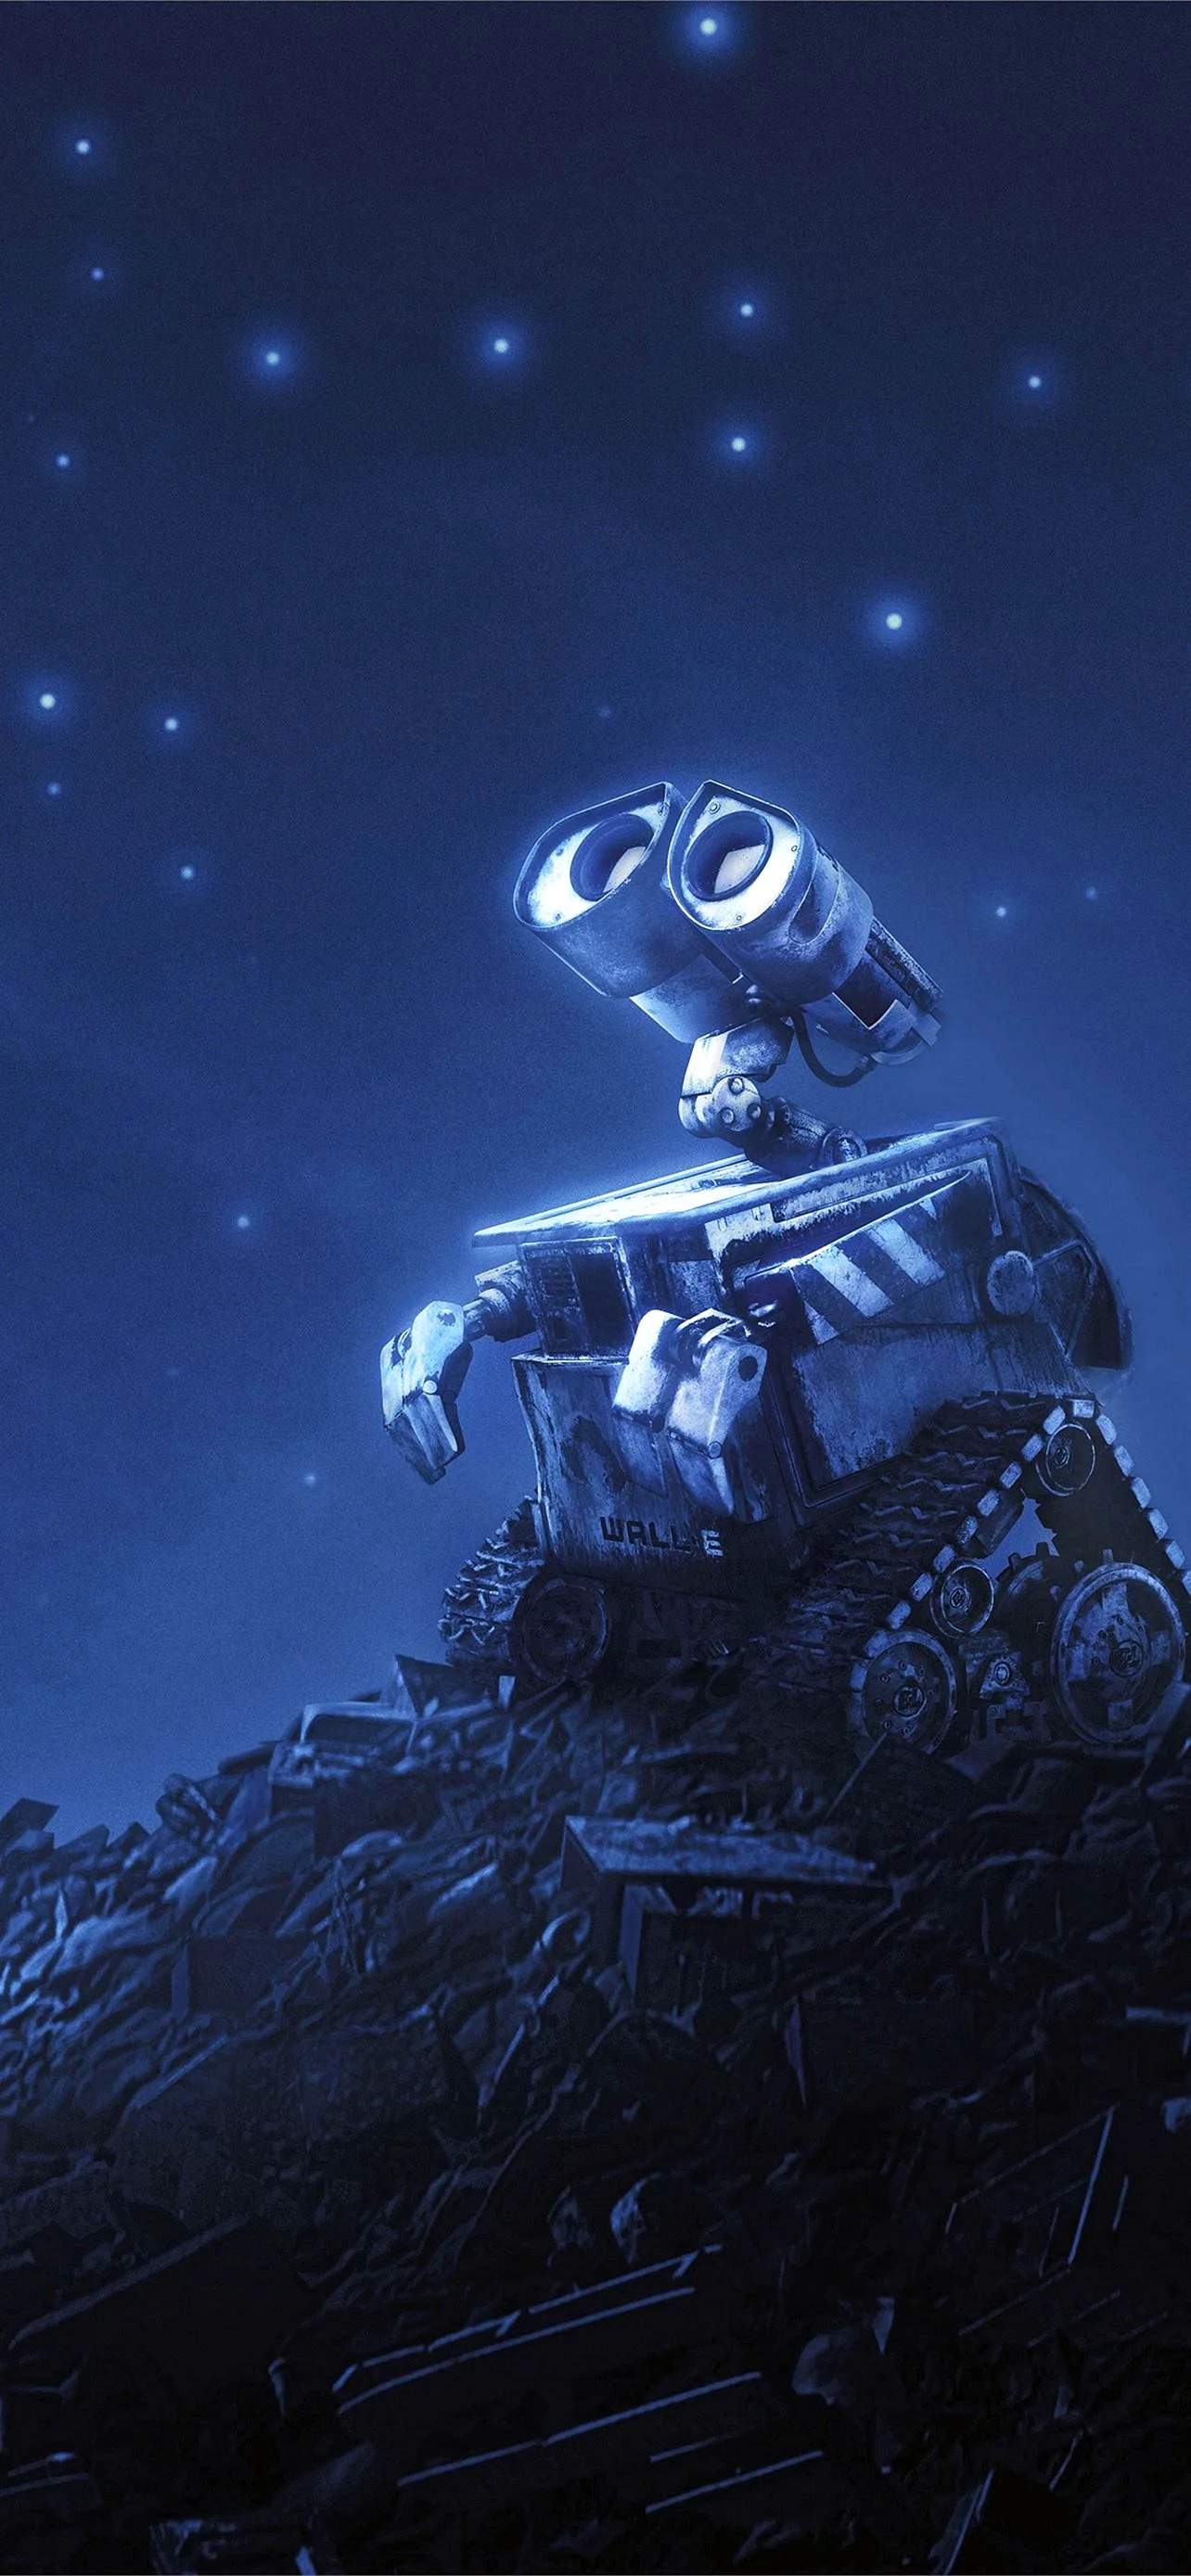 Wall-e 2008 Wallpaper for iPhone 14 Plus